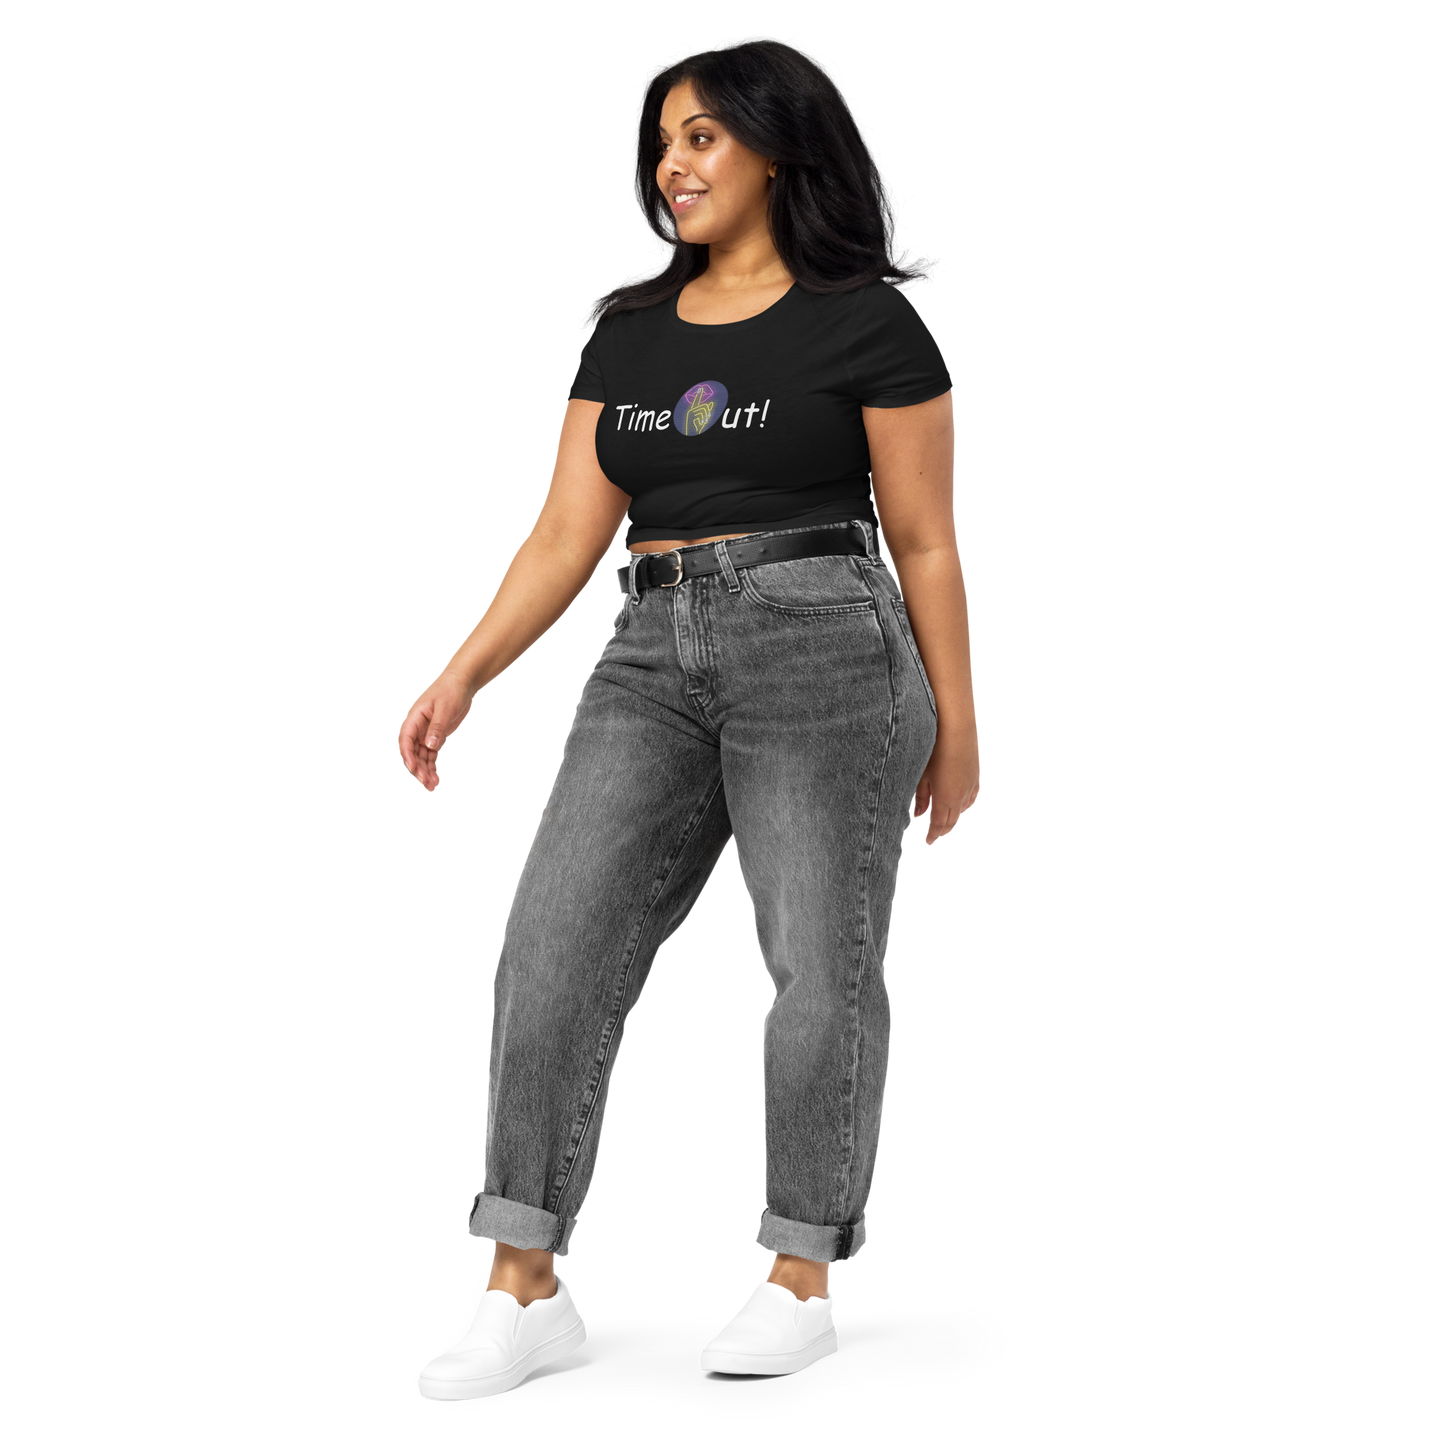 Time Out! Women’s Crop Tee